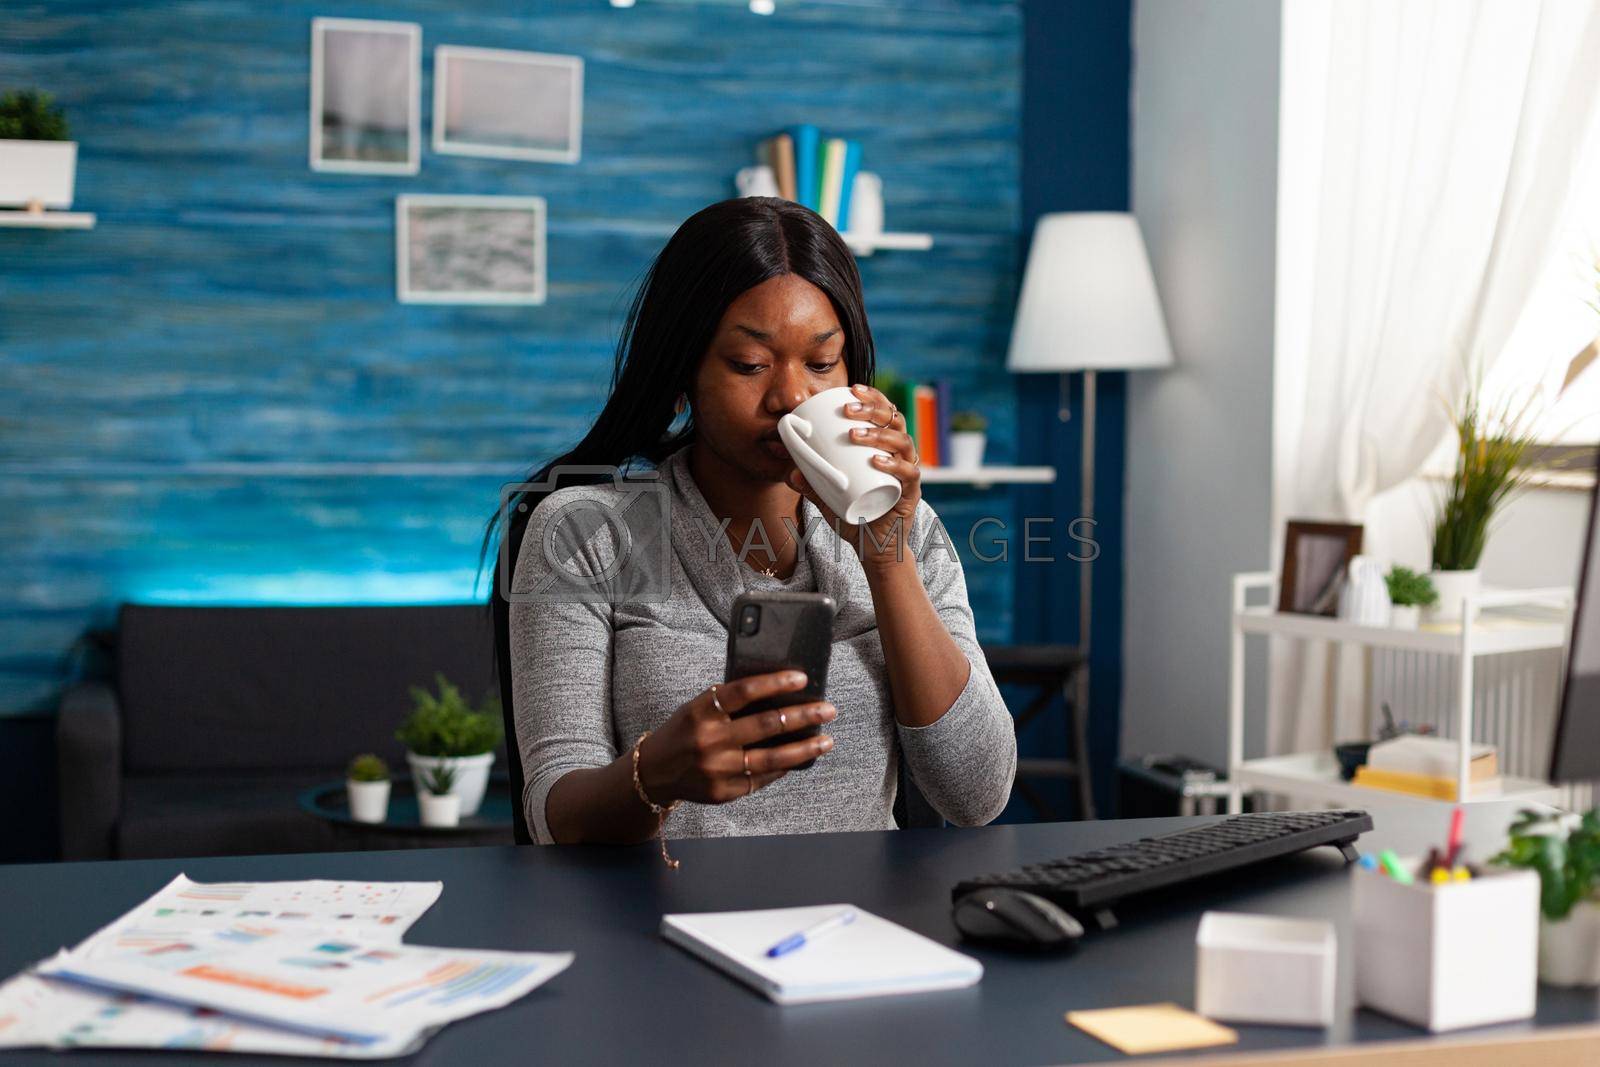 Black woman holding smartphone in hands chatting with people browsing communication information sitting at desk in living room. African american student looking on social media